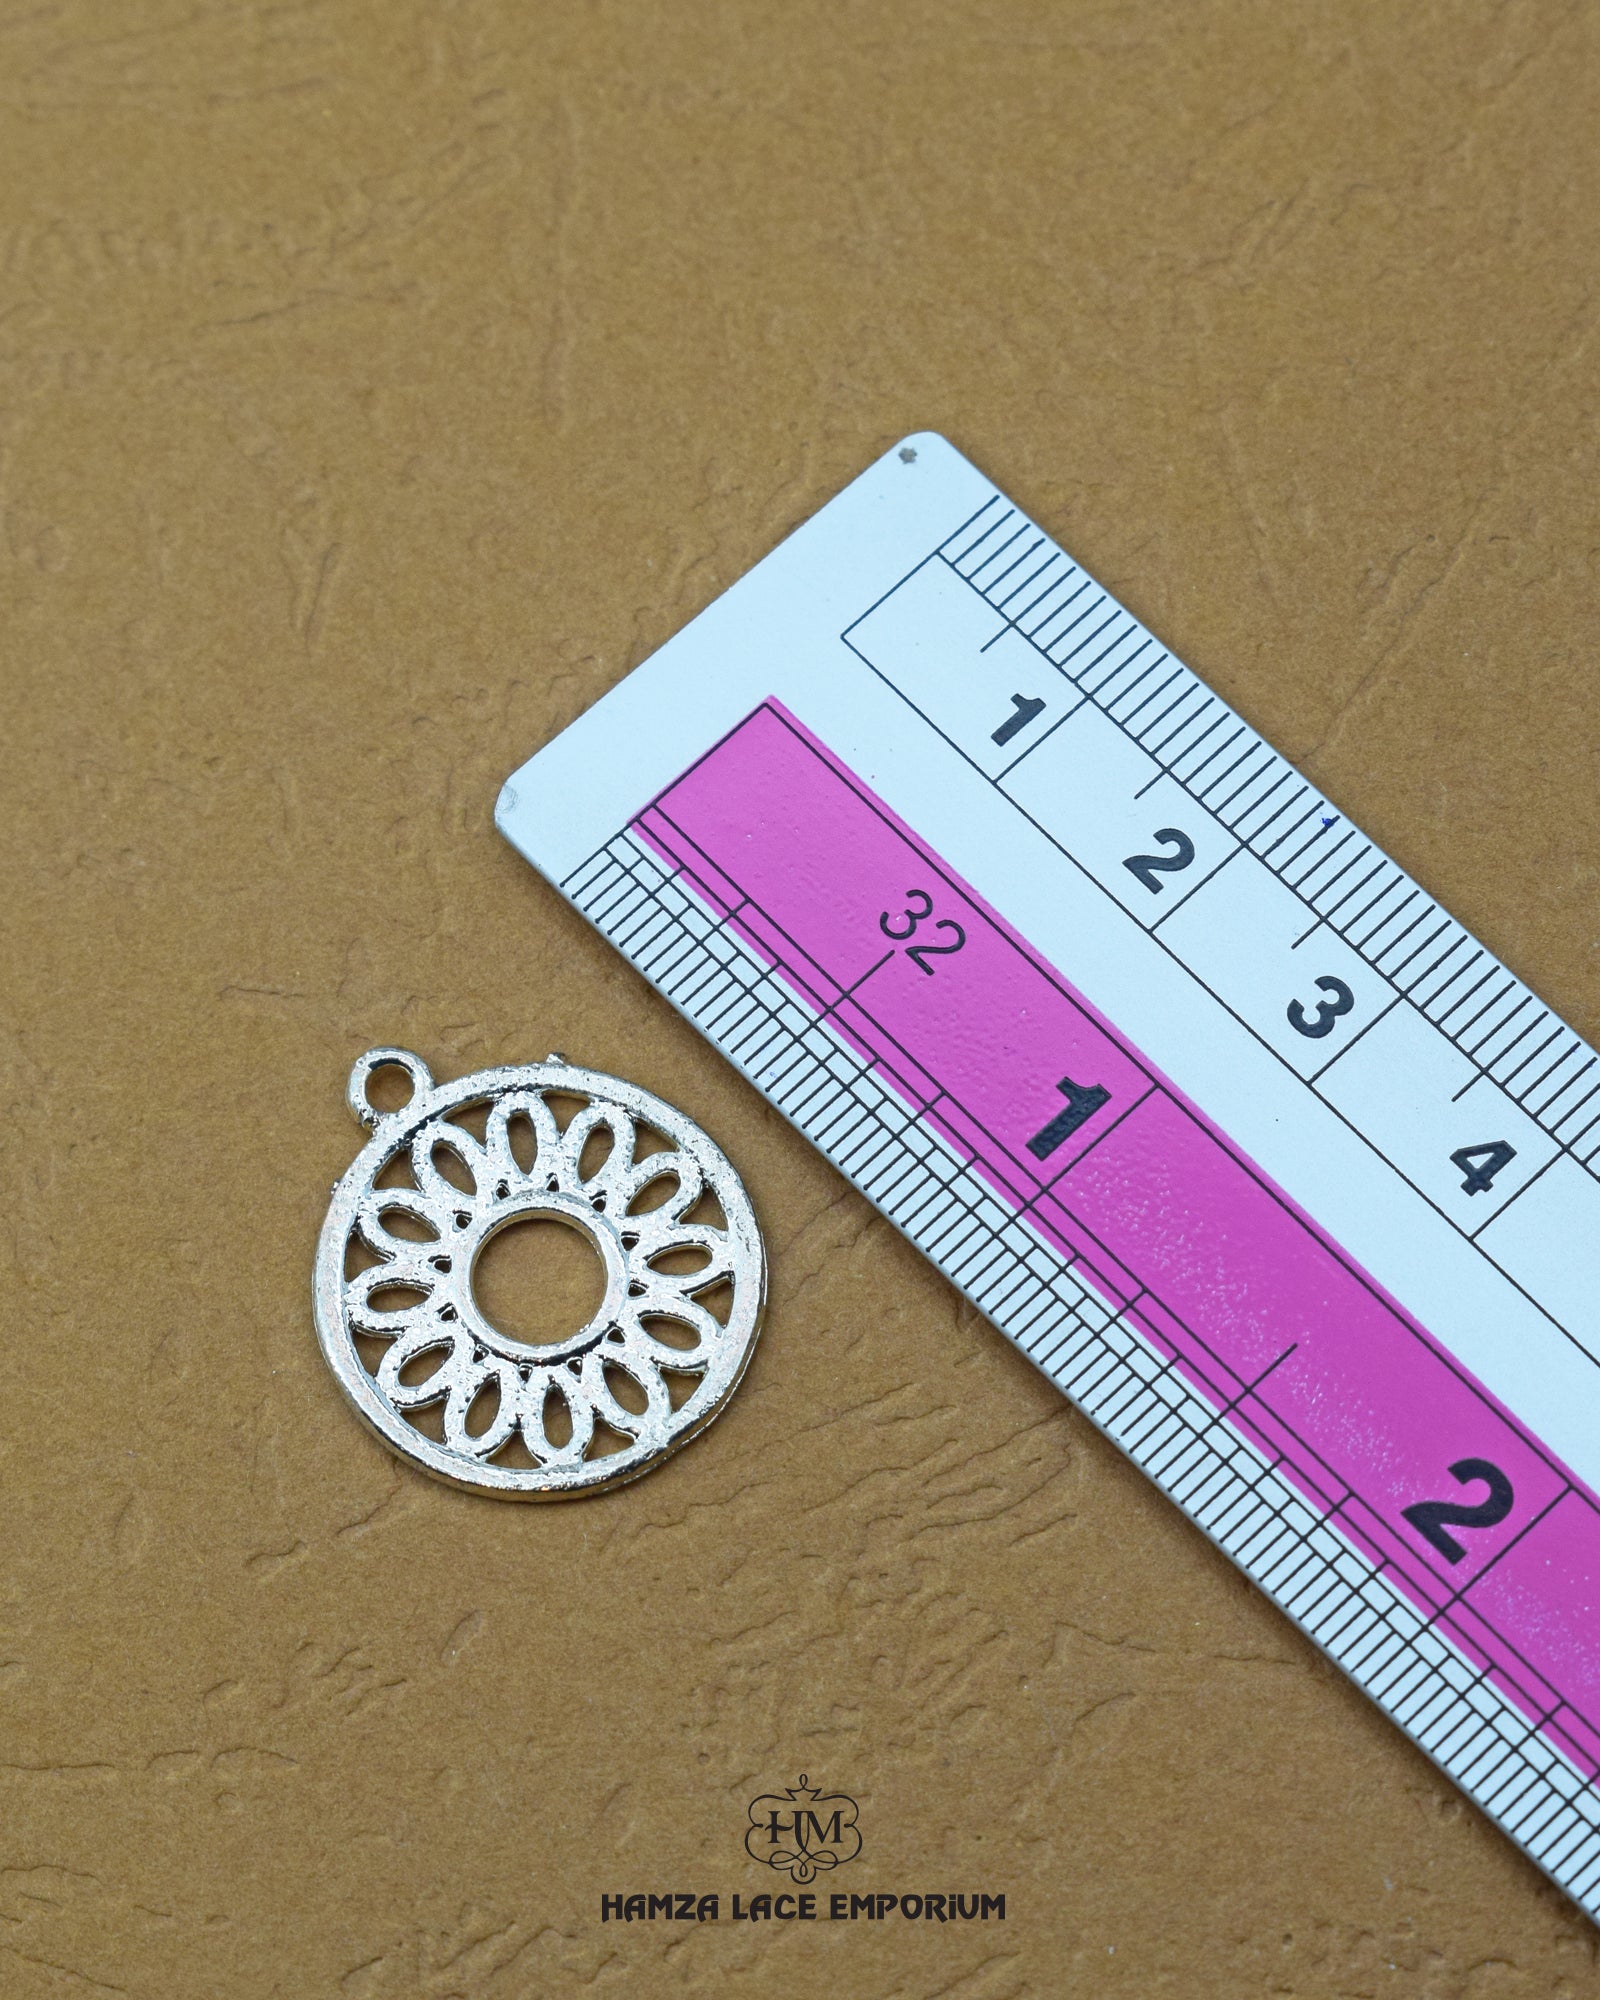 Elegant 'Round Shape Accessory MA271' for Clothing (Size shown with ruler)